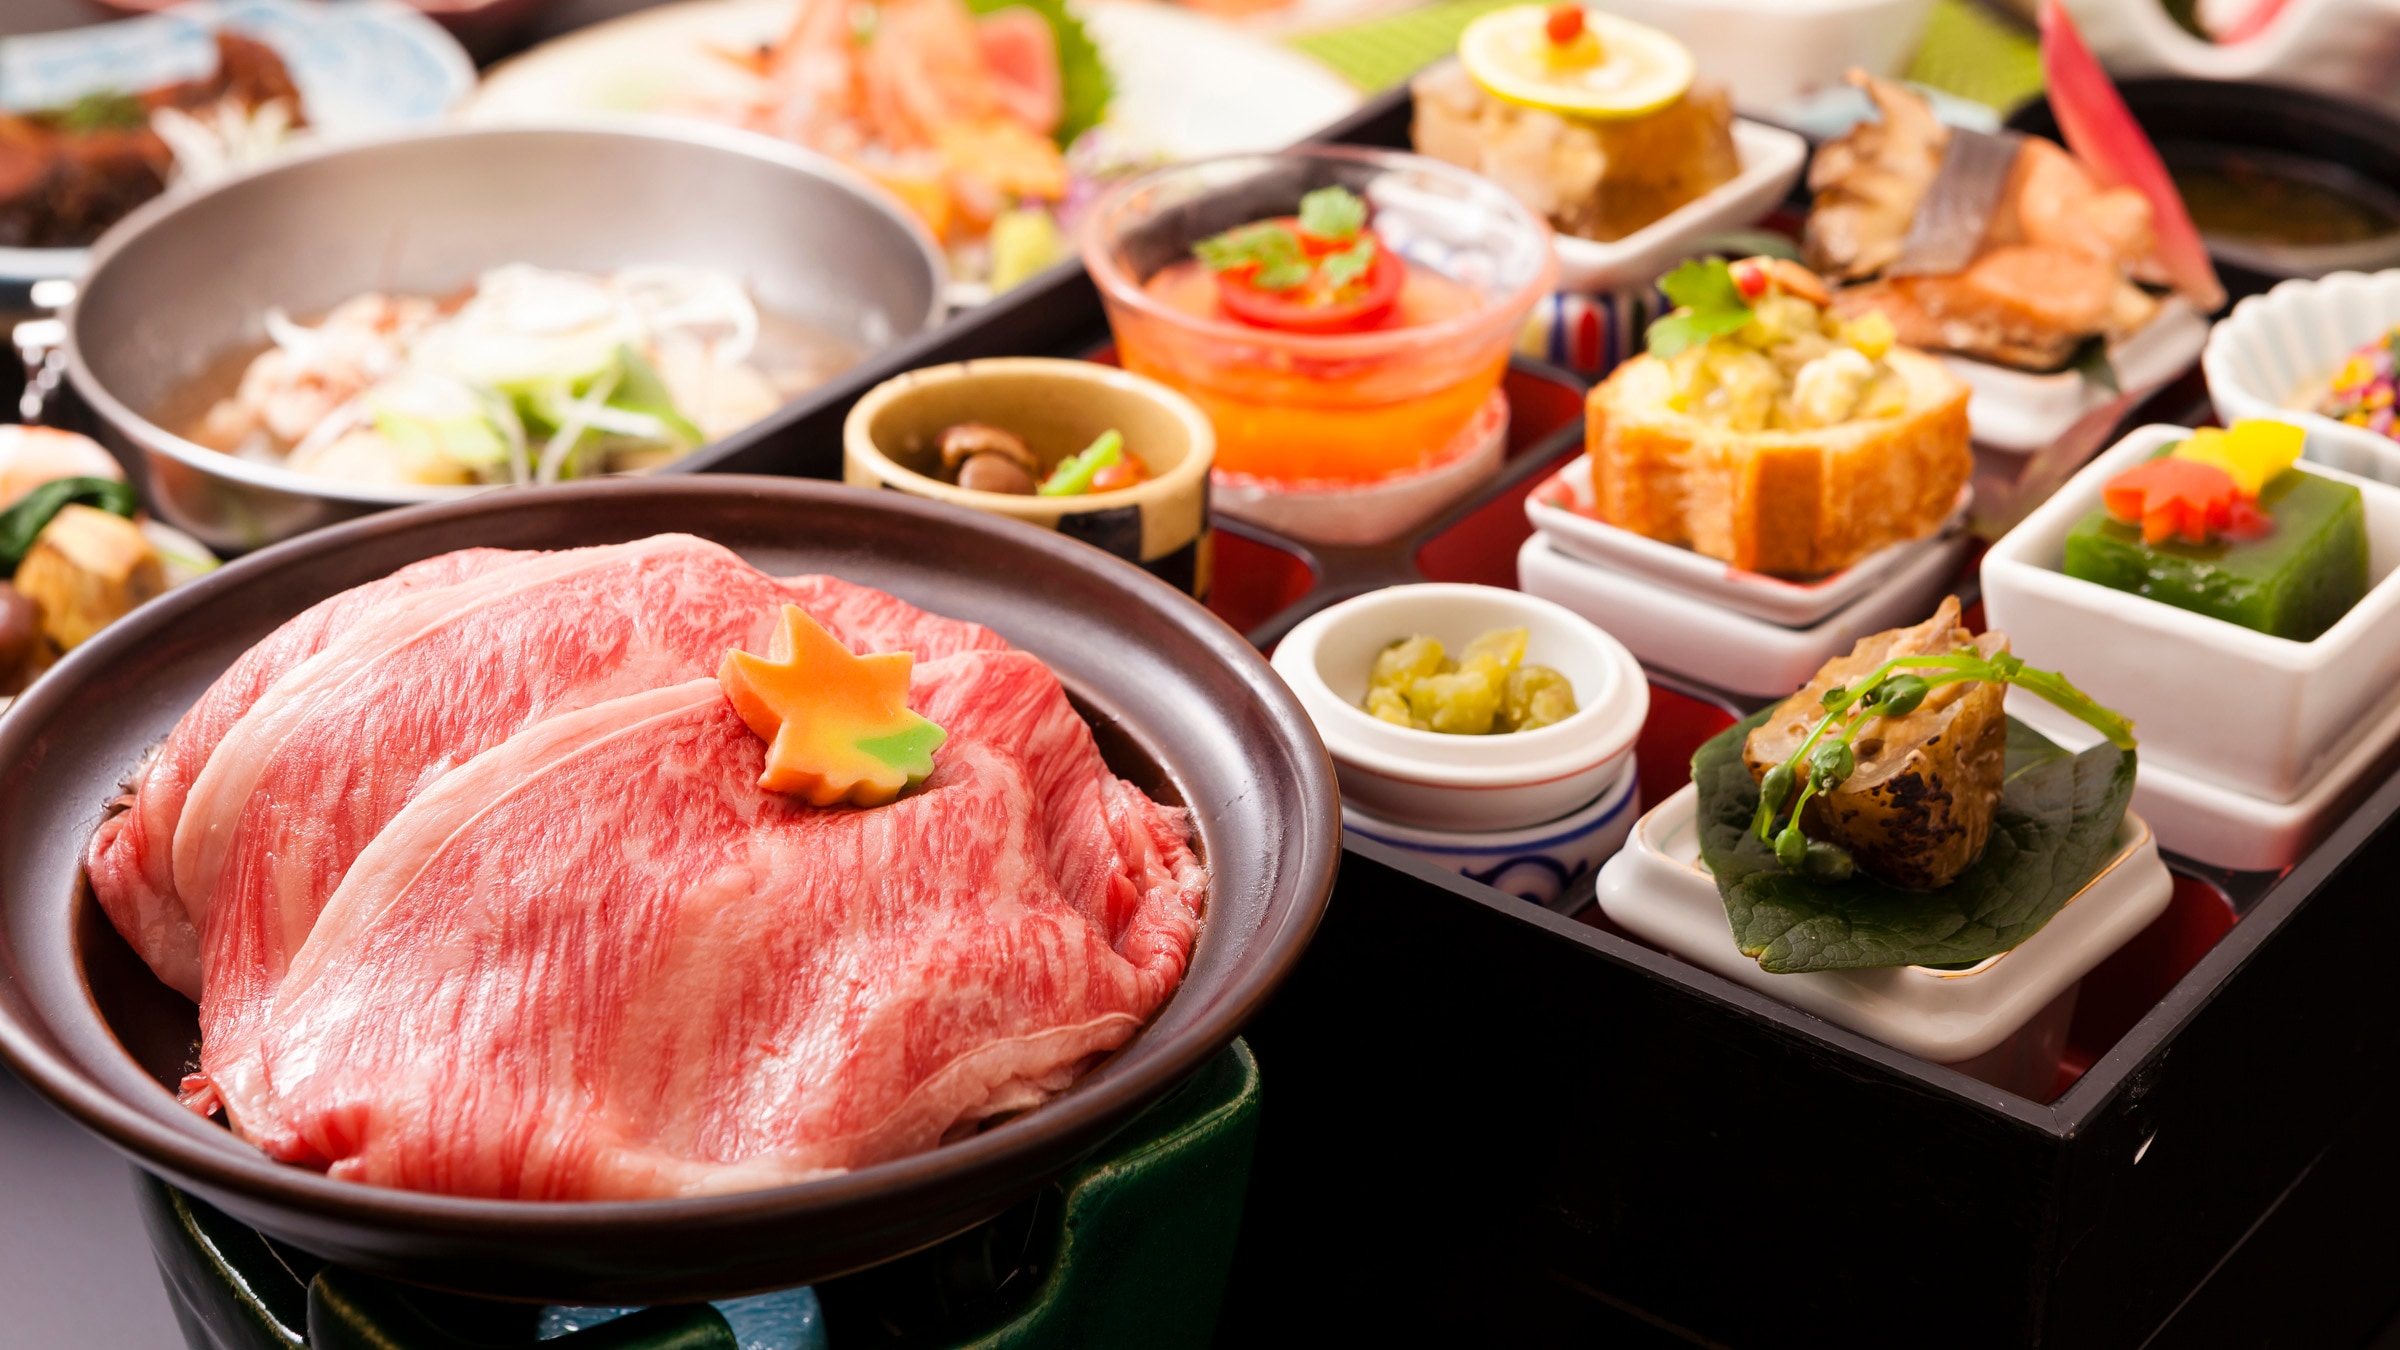 [Yamagata beef sukiyaki], which is appreciated by many people, and a Japanese-style kaiseki meal recommended by the chef